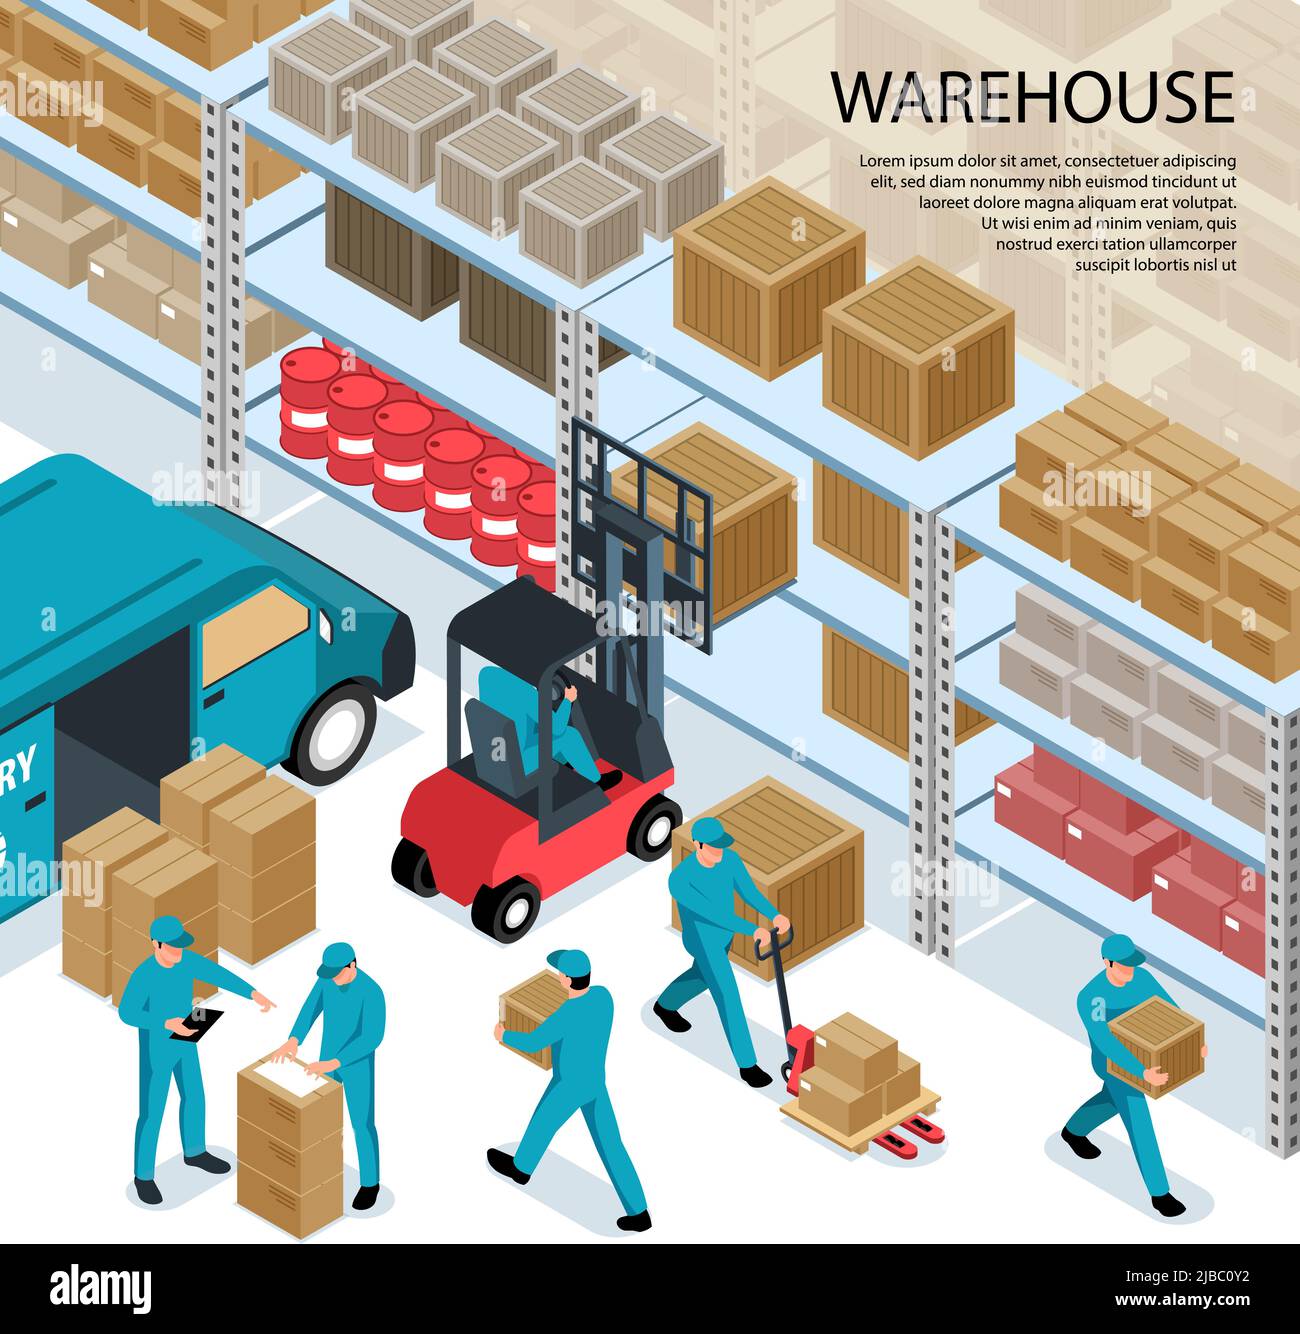 Warehouse isometric vector illustration with delivery truck and workers loading boxes by forklifts and manually Stock Vector